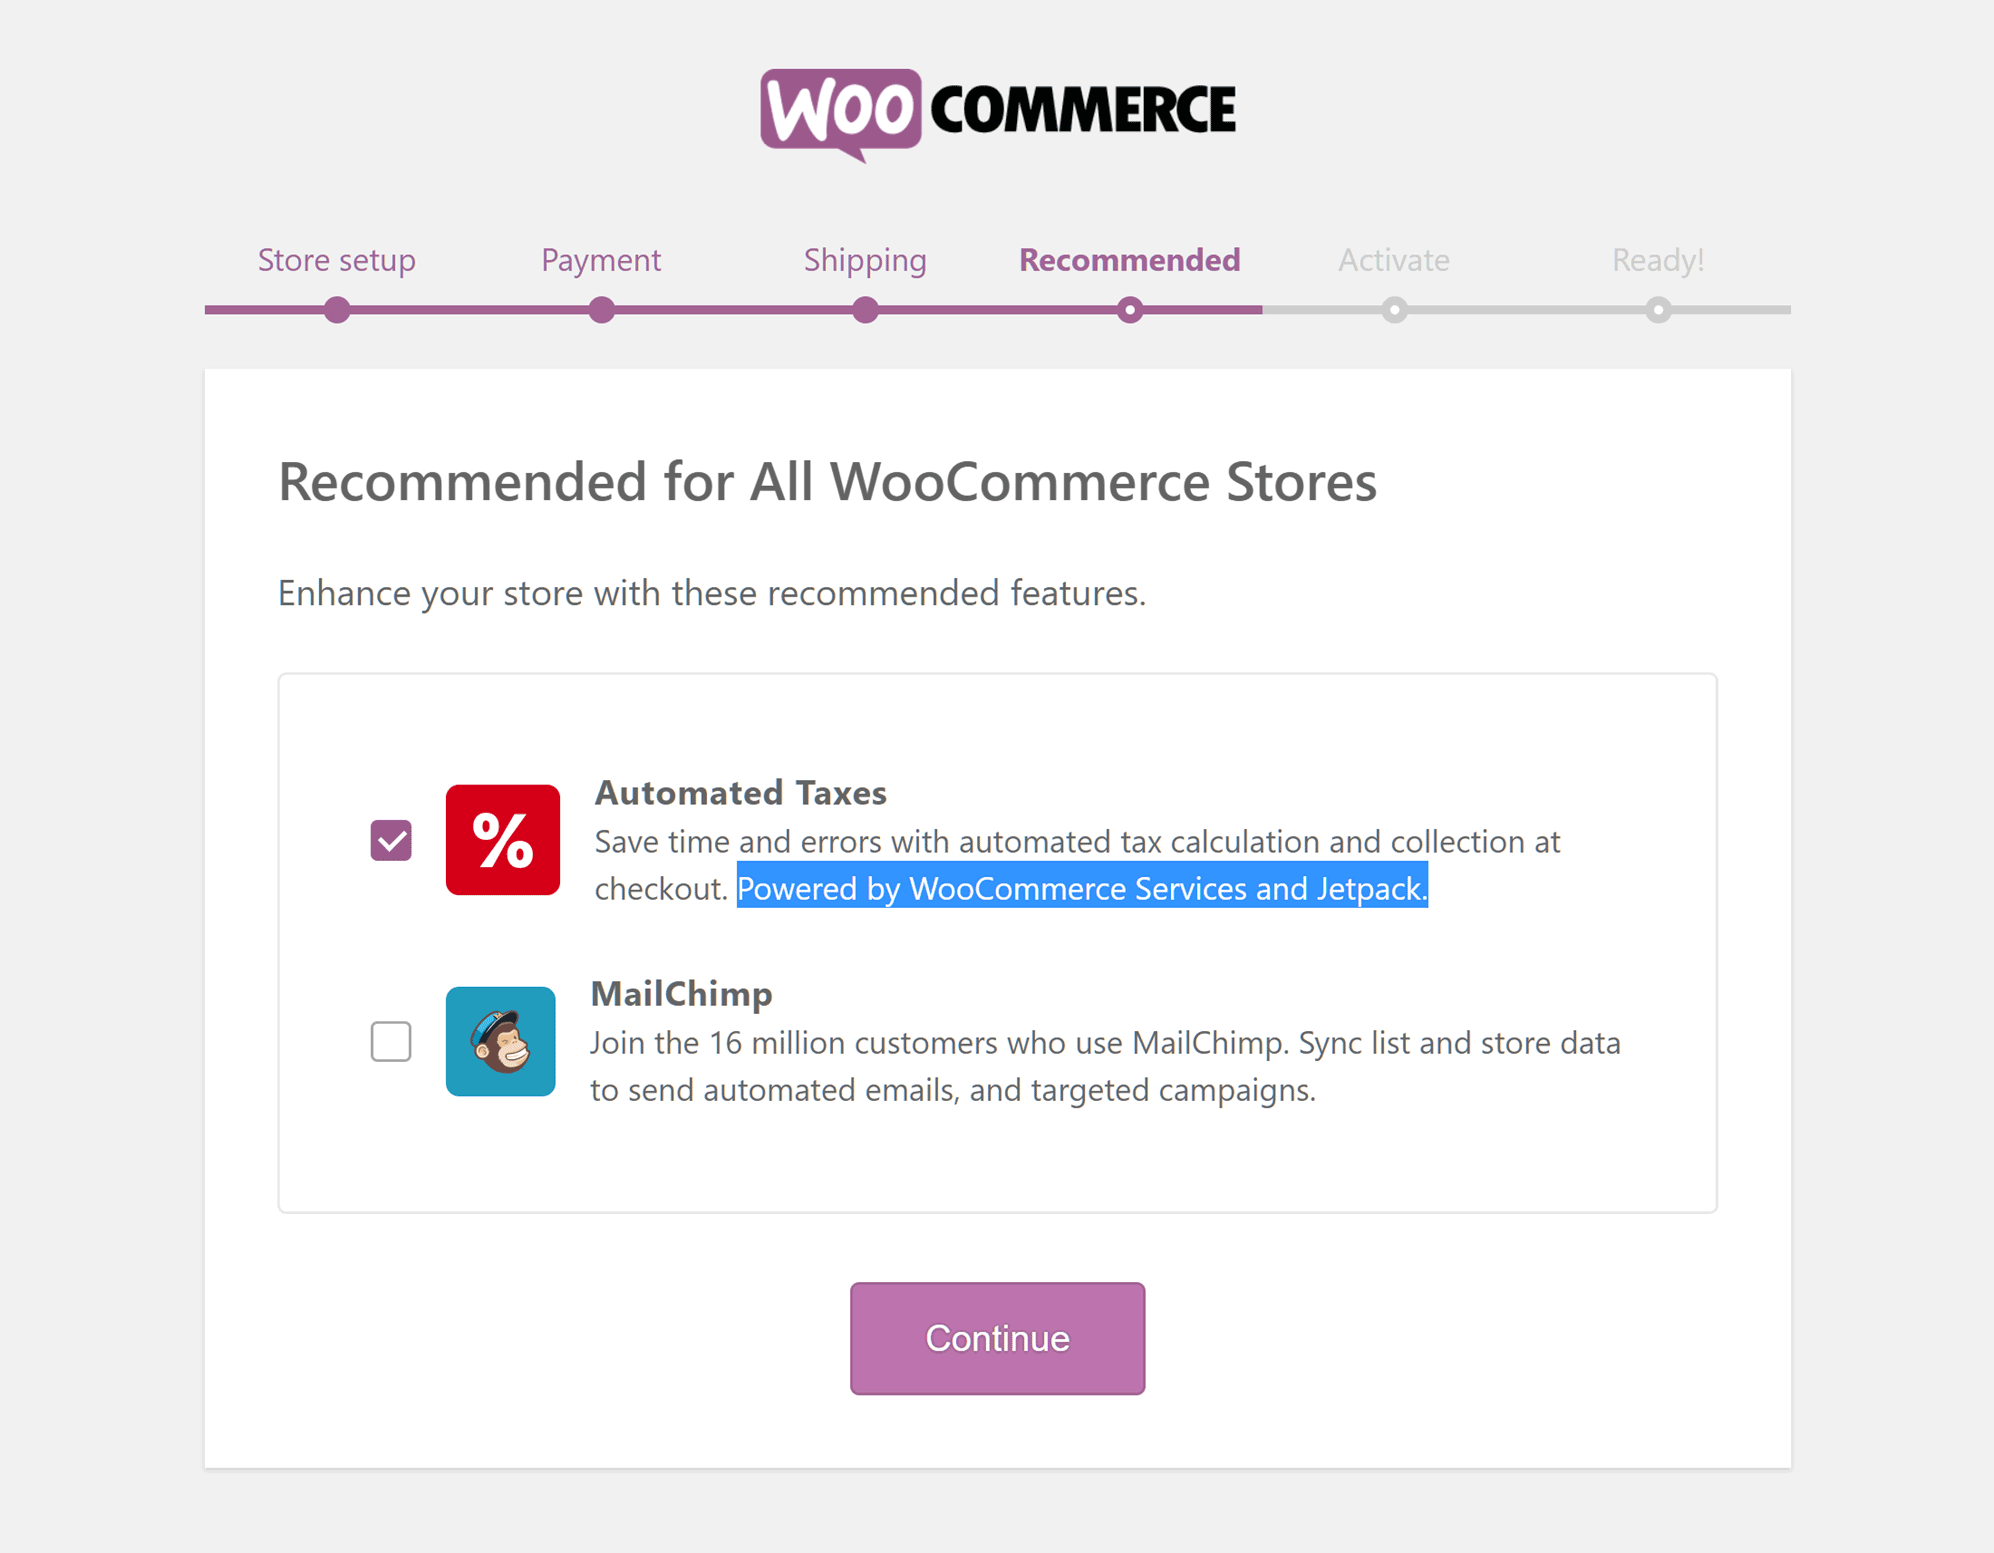 Enable WooCommerce Services